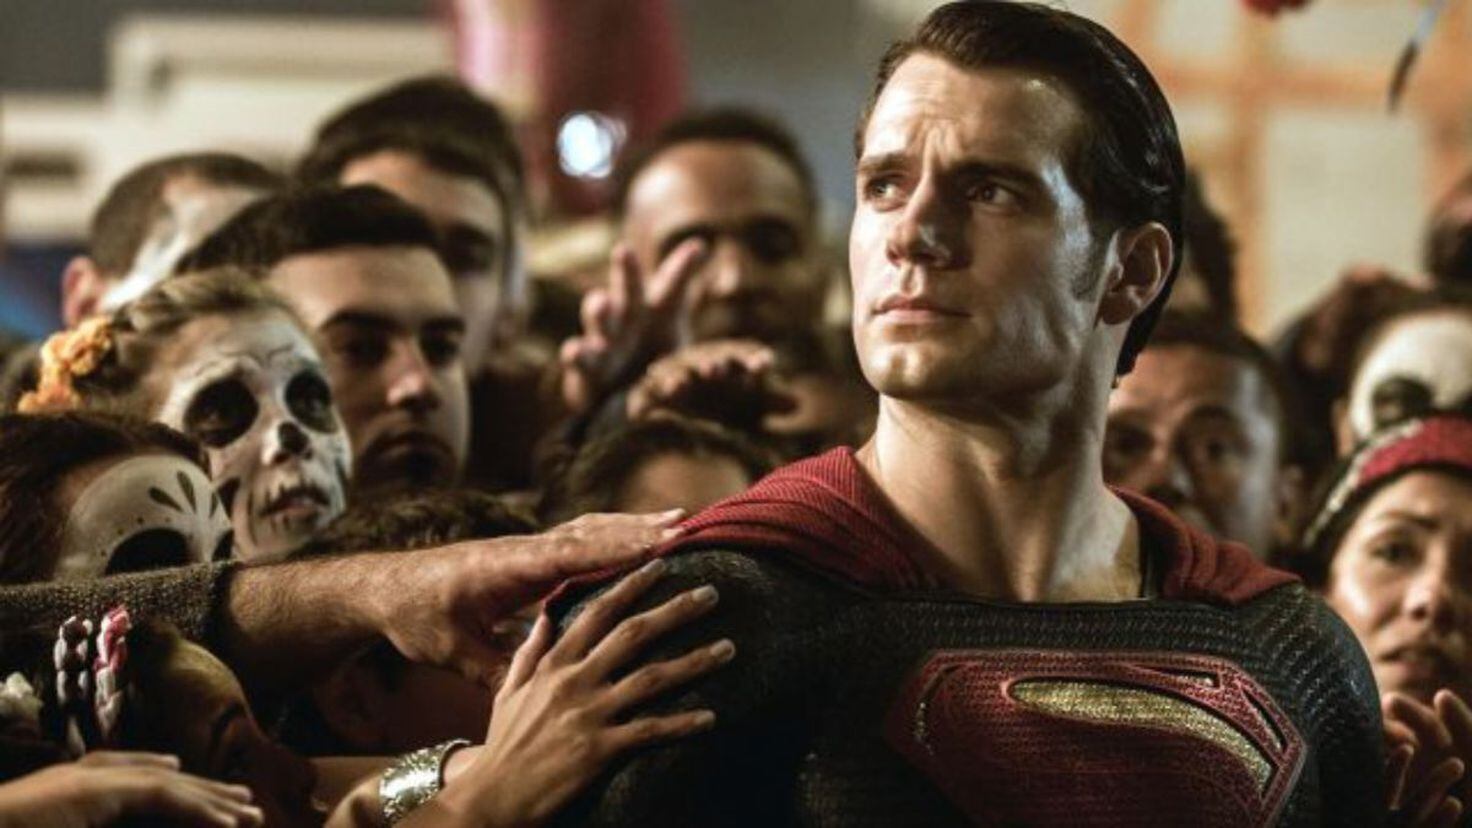 Henry Cavill Is Out As Superman, Putting DC's Extended Universe